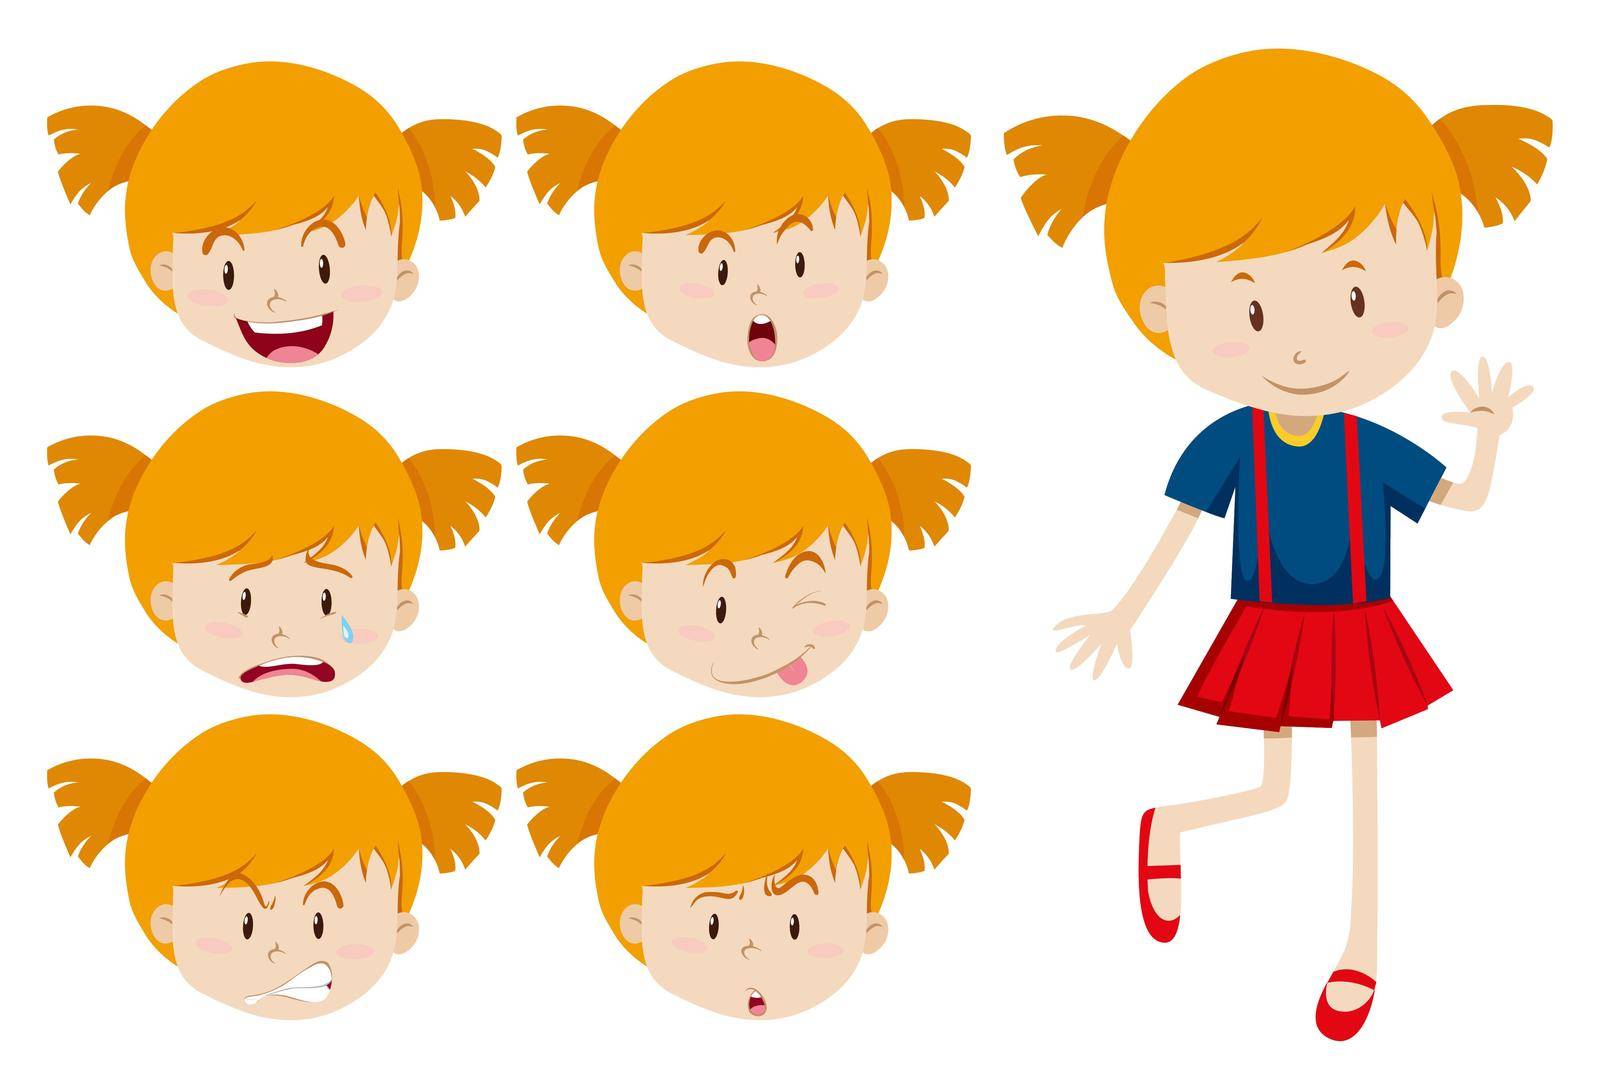 Cute girl with facial expressions by iimages